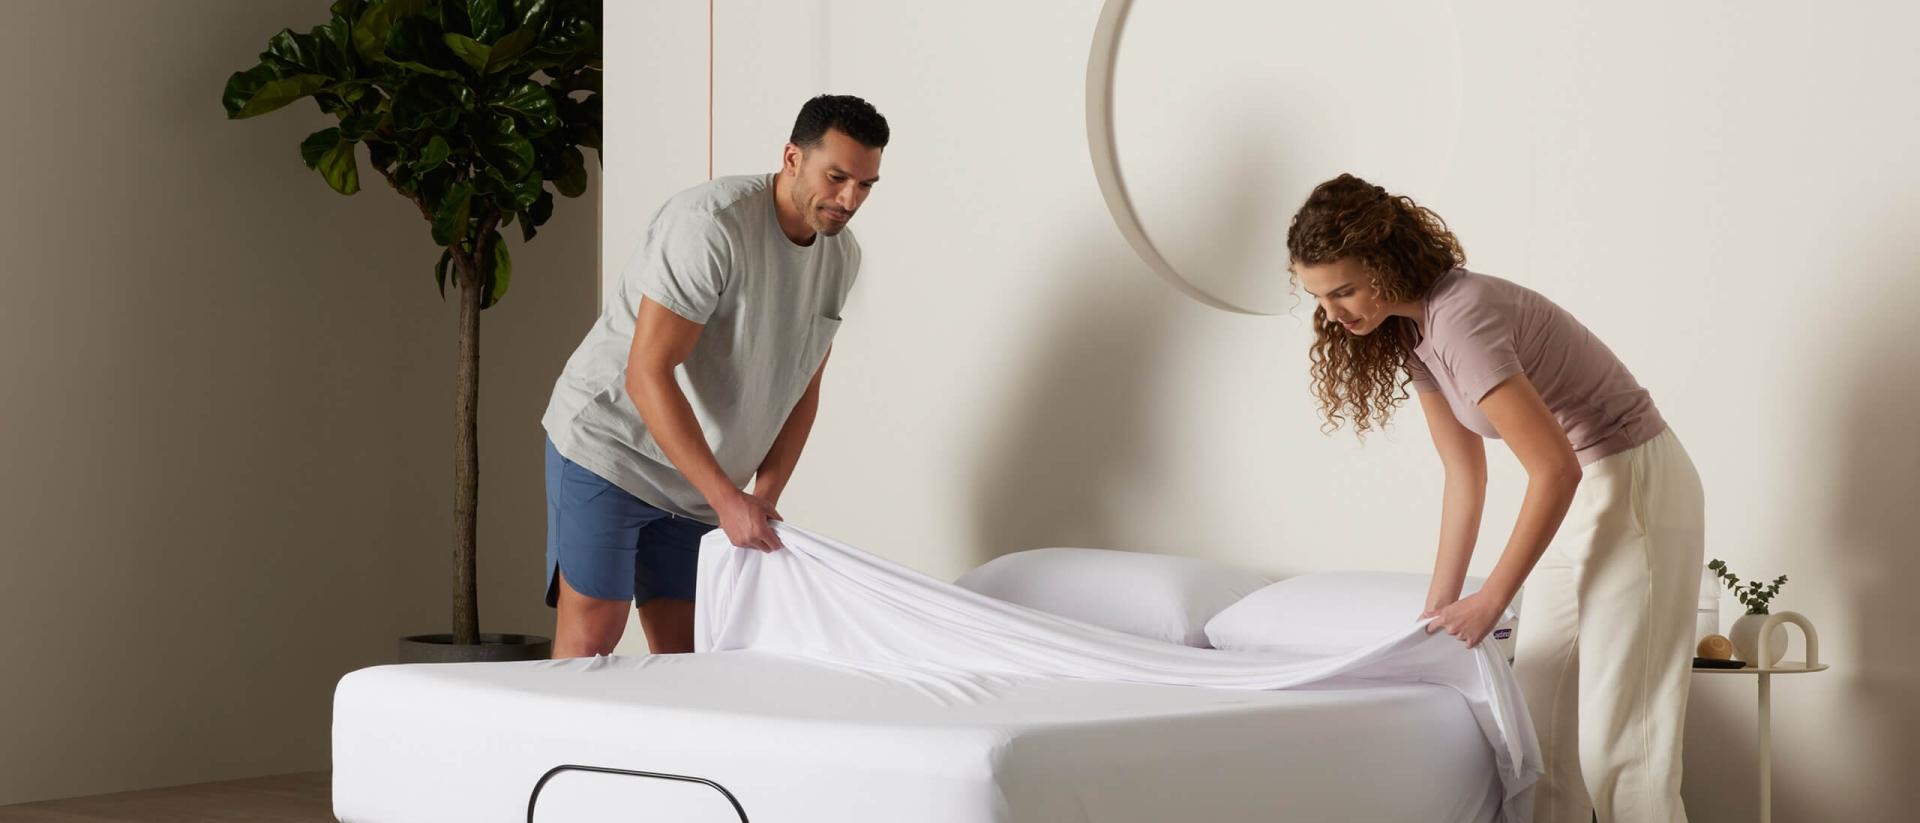 Two people removing a sheet from a Purple mattress.